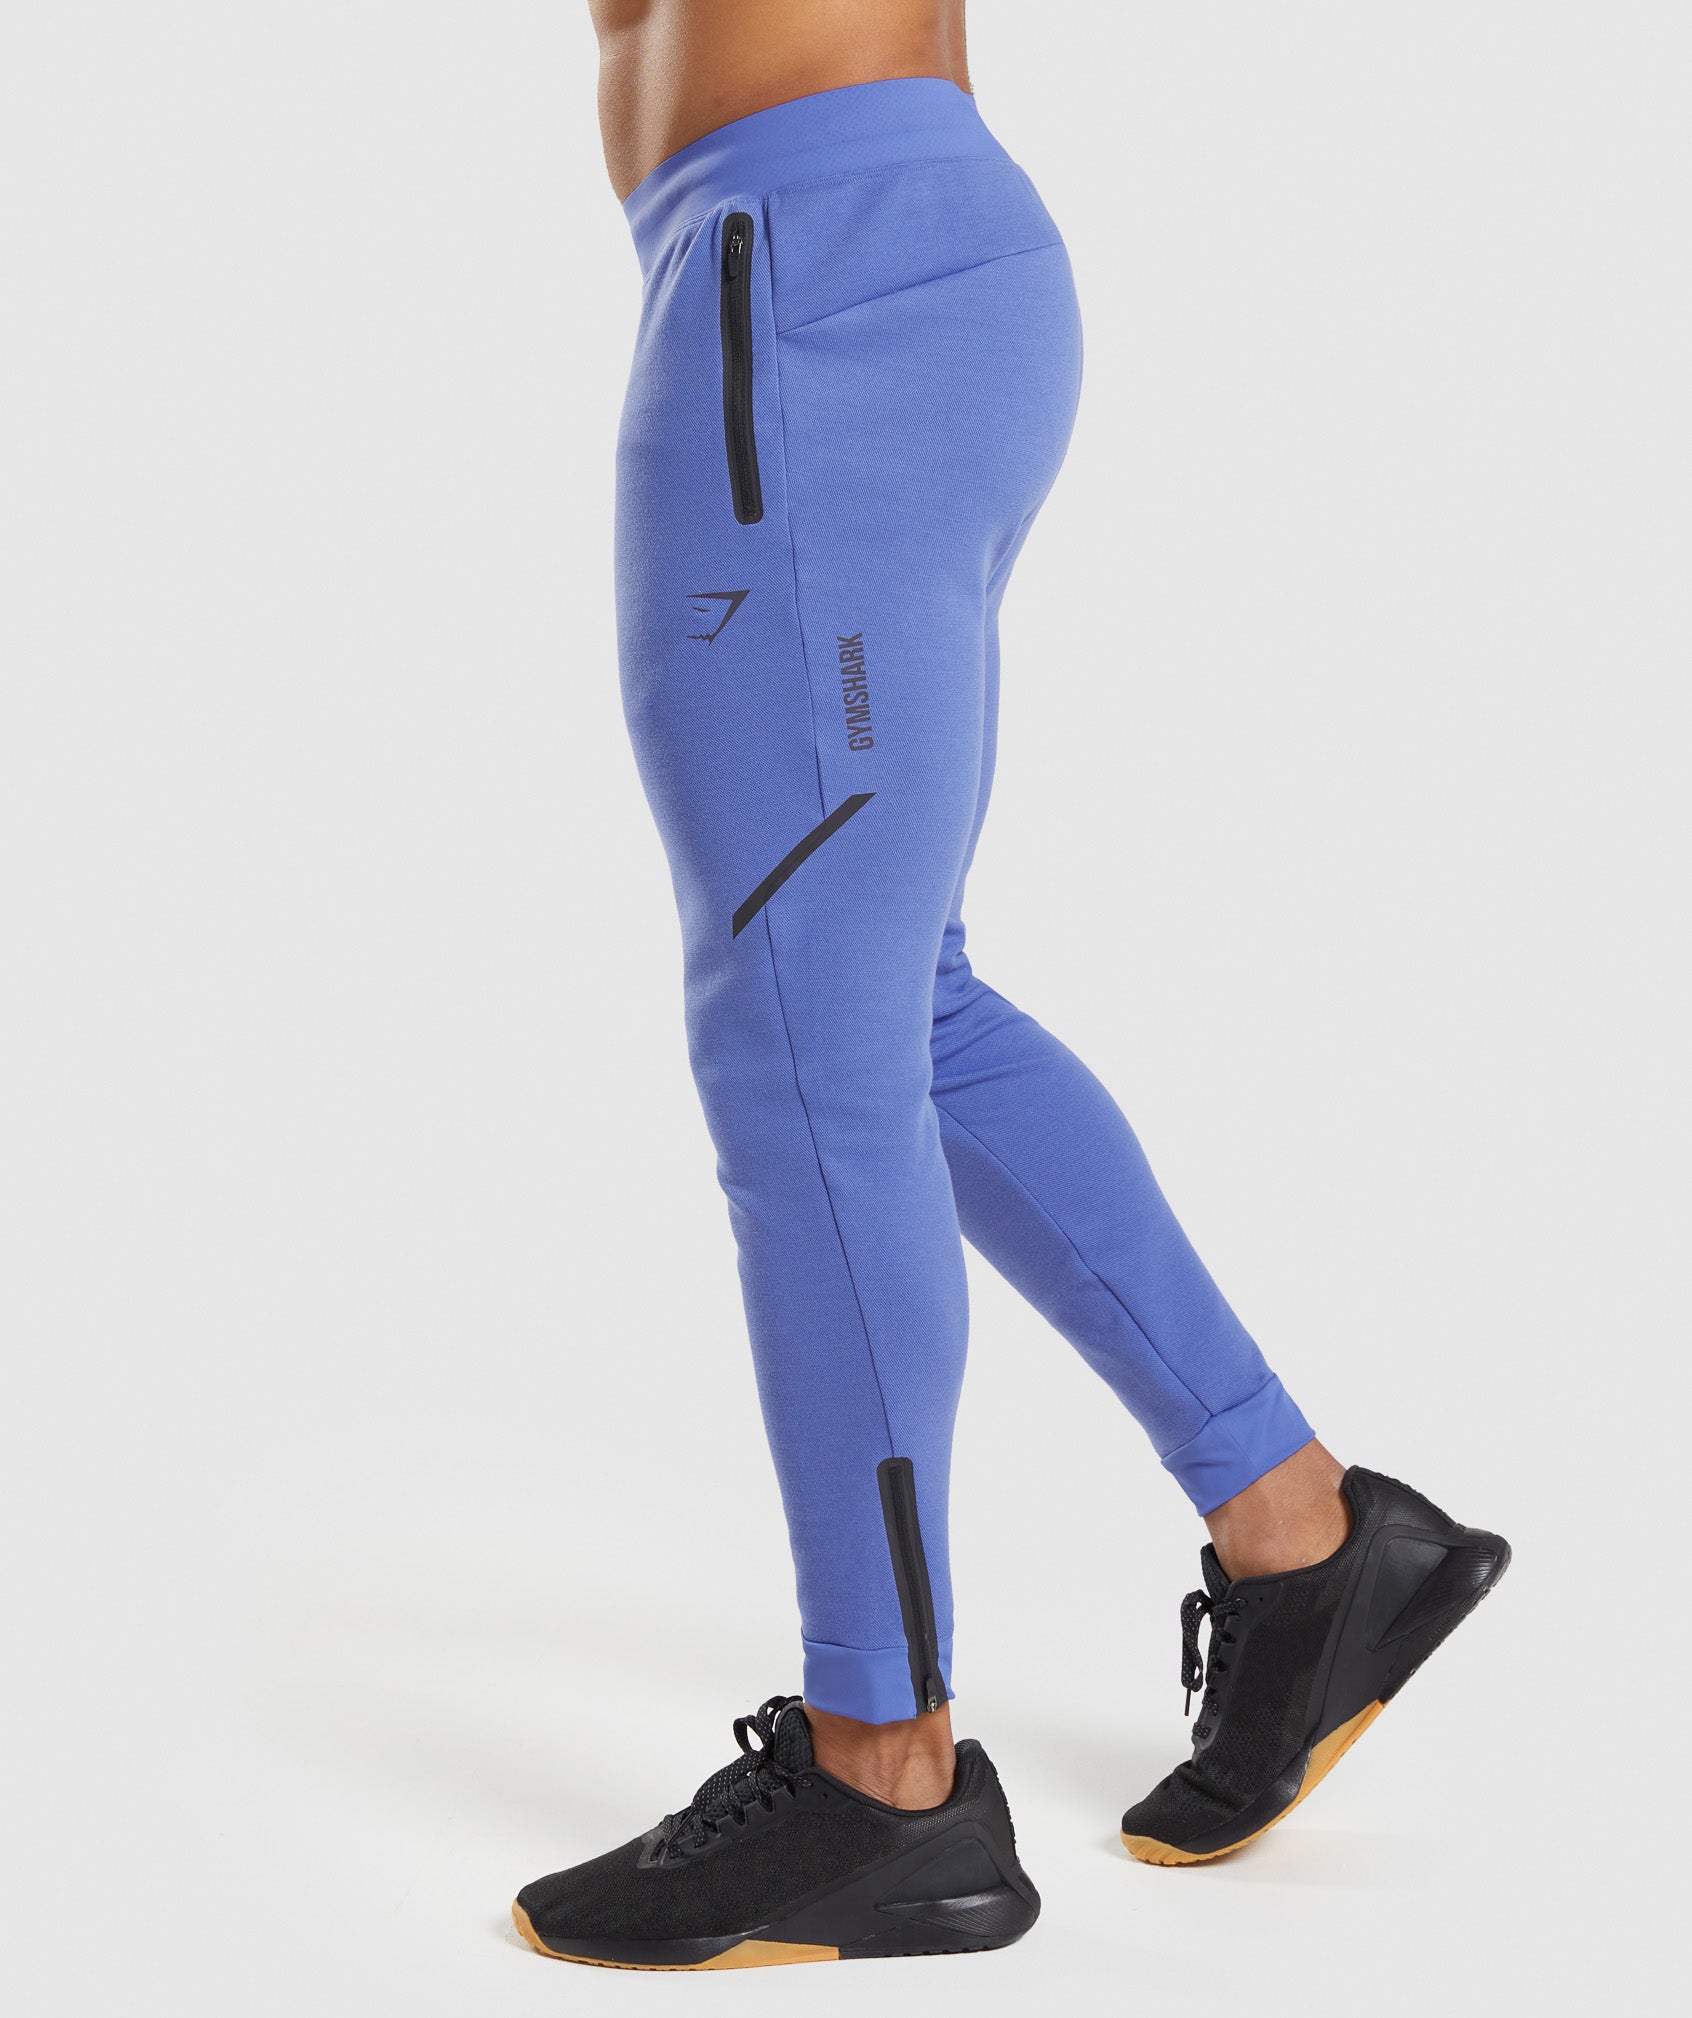 Apex Technical Joggers in Court Blue - view 3